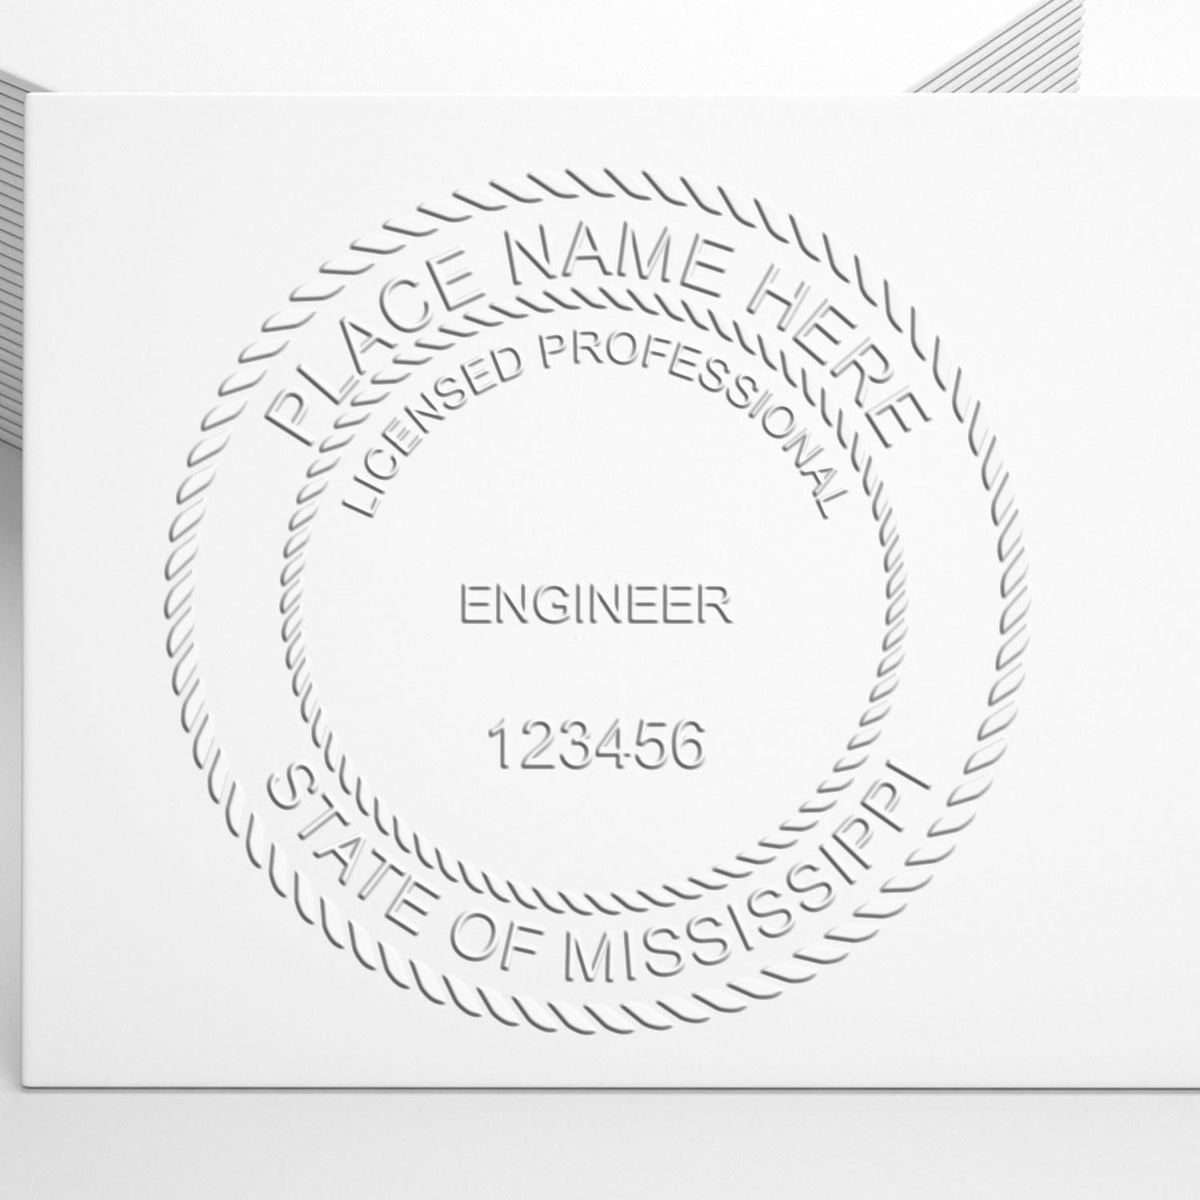 A photograph of the Mississippi Engineer Desk Seal stamp impression reveals a vivid, professional image of the on paper.